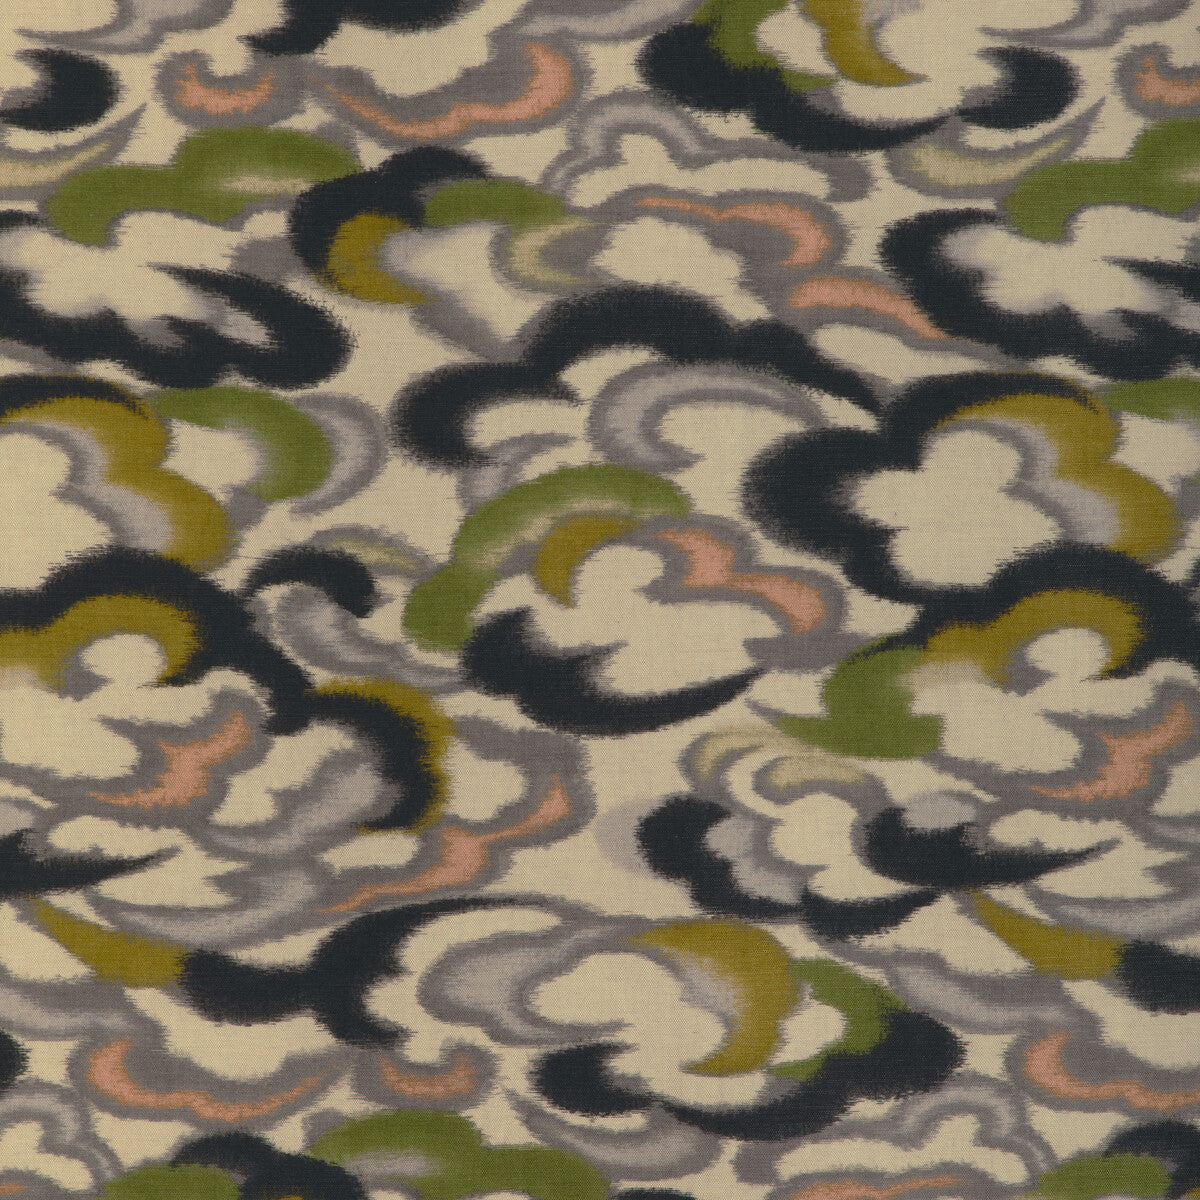 Stratus Print fabric in peridot/gold color - pattern 8023138.34.0 - by Brunschwig &amp; Fils in the Celeste collection